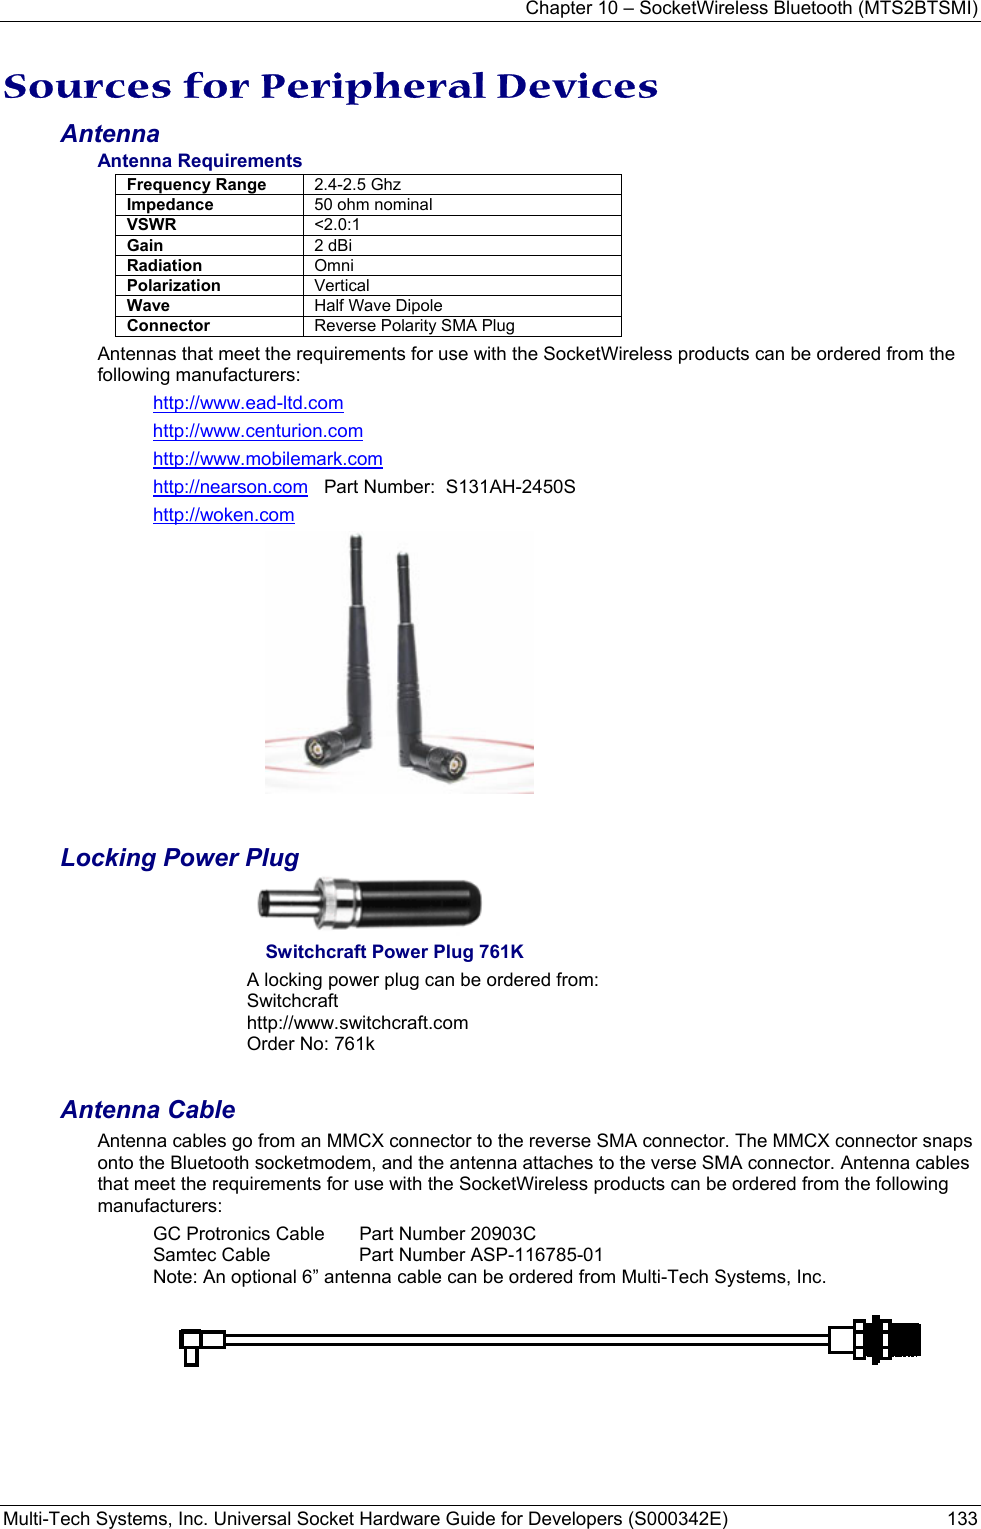 Chapter 10 – SocketWireless Bluetooth (MTS2BTSMI) Multi-Tech Systems, Inc. Universal Socket Hardware Guide for Developers (S000342E)  133  Sources for Peripheral Devices Antenna Antenna Requirements Frequency Range  2.4-2.5 Ghz Impedance  50 ohm nominal VSWR  &lt;2.0:1 Gain  2 dBi Radiation  Omni Polarization  Vertical Wave  Half Wave Dipole Connector  Reverse Polarity SMA Plug  Antennas that meet the requirements for use with the SocketWireless products can be ordered from the following manufacturers: http://www.ead-ltd.com http://www.centurion.com http://www.mobilemark.com http://nearson.com   Part Number:  S131AH-2450S  http://woken.com  Locking Power Plug   Switchcraft Power Plug 761K A locking power plug can be ordered from: Switchcraft  http://www.switchcraft.com Order No: 761k  Antenna Cable Antenna cables go from an MMCX connector to the reverse SMA connector. The MMCX connector snaps onto the Bluetooth socketmodem, and the antenna attaches to the verse SMA connector. Antenna cables that meet the requirements for use with the SocketWireless products can be ordered from the following manufacturers: GC Protronics Cable   Part Number 20903C Samtec Cable  Part Number ASP-116785-01 Note: An optional 6” antenna cable can be ordered from Multi-Tech Systems, Inc. 